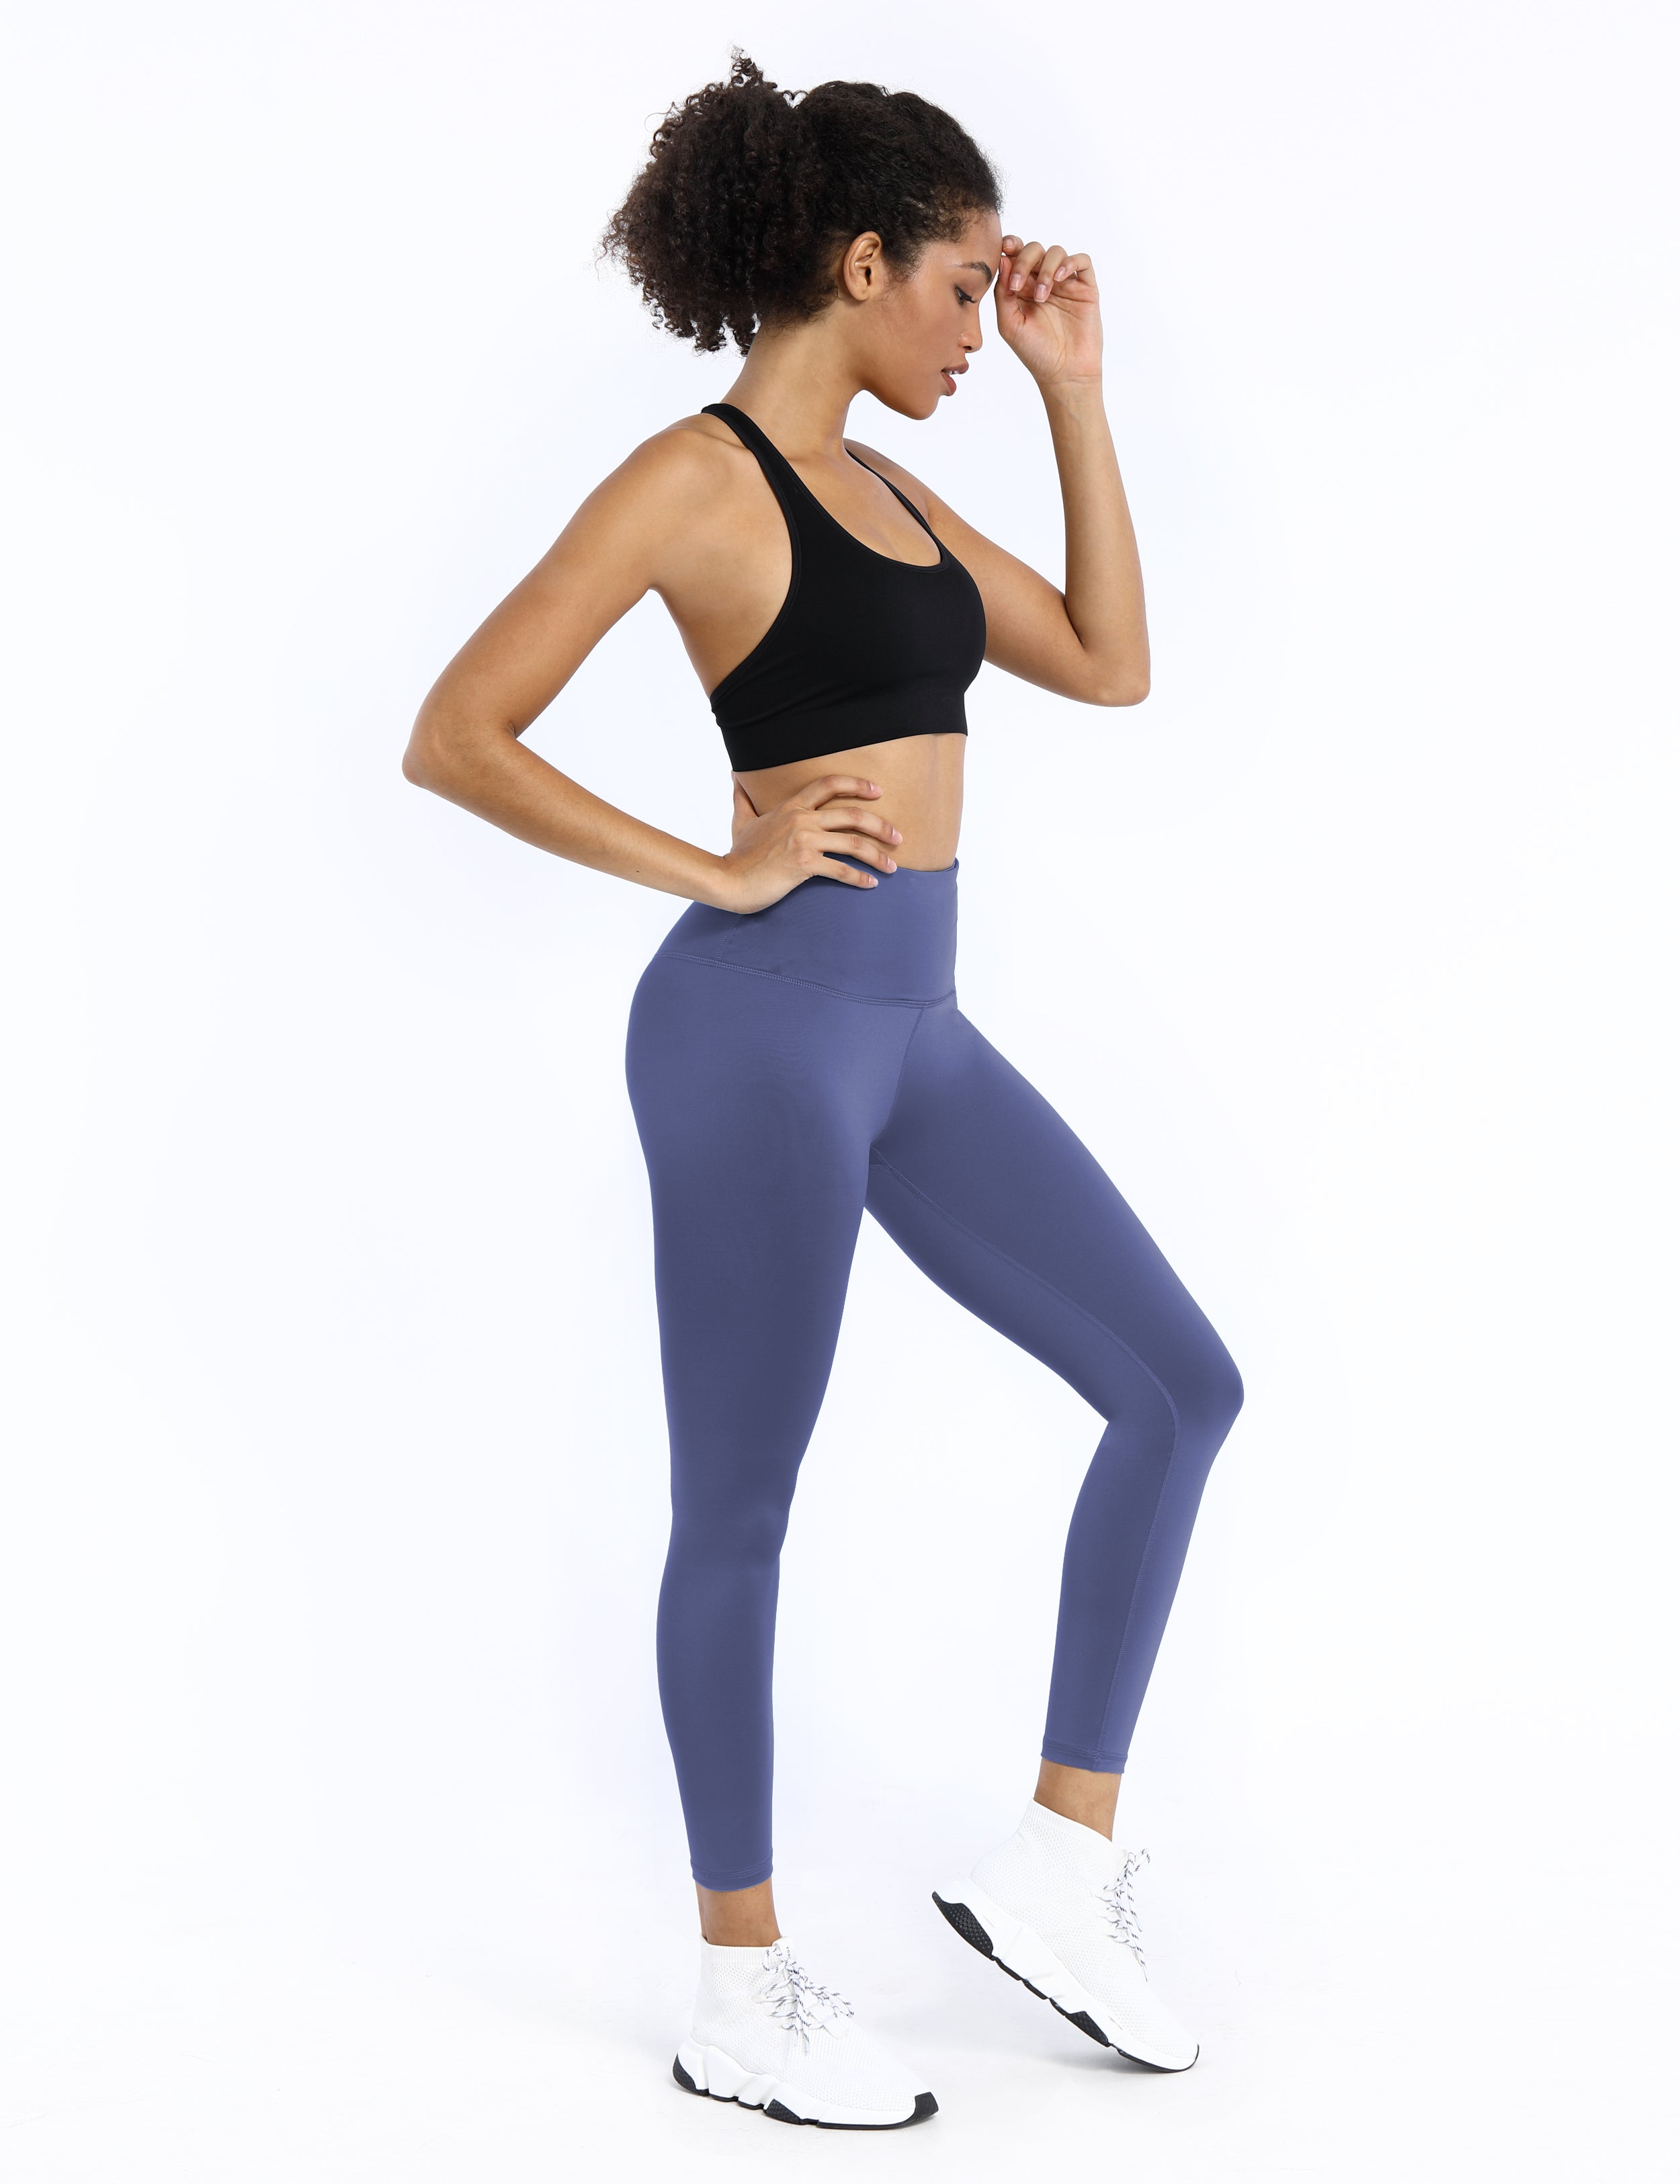 Active V Waist Bubblelime Yoga Pants For Tight Sports And Running From  Alexandbelly, $13.26